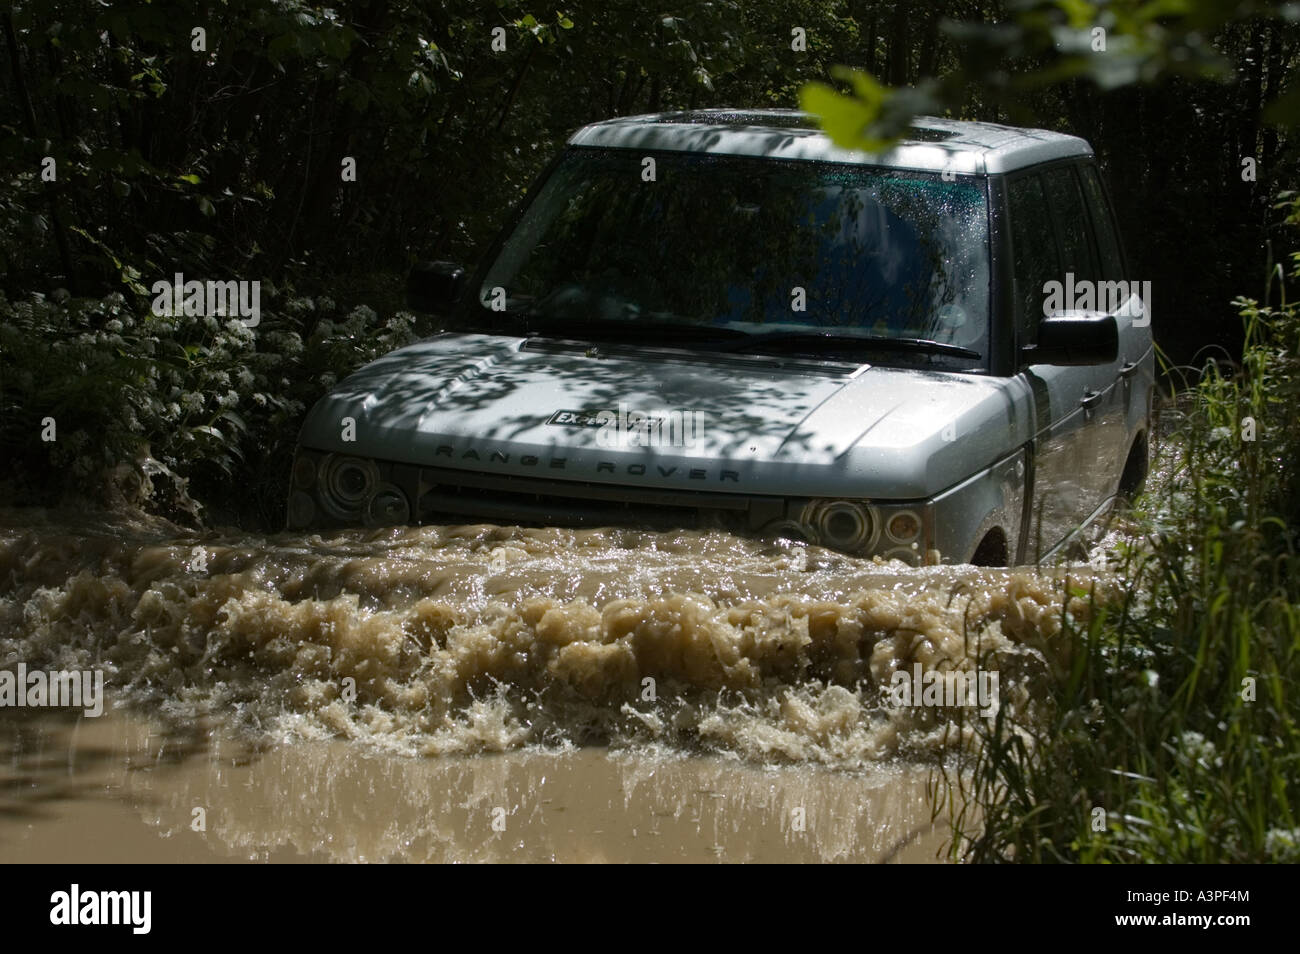 Land rover's flagship model the Range rover series 3 wades into deep water Stock Photo